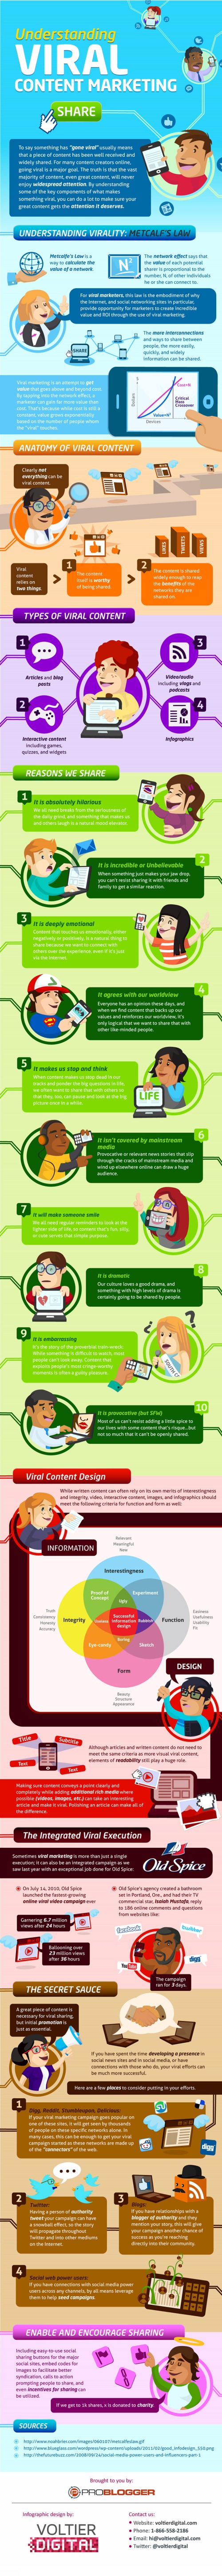 Infographic for Viral Content Marketing